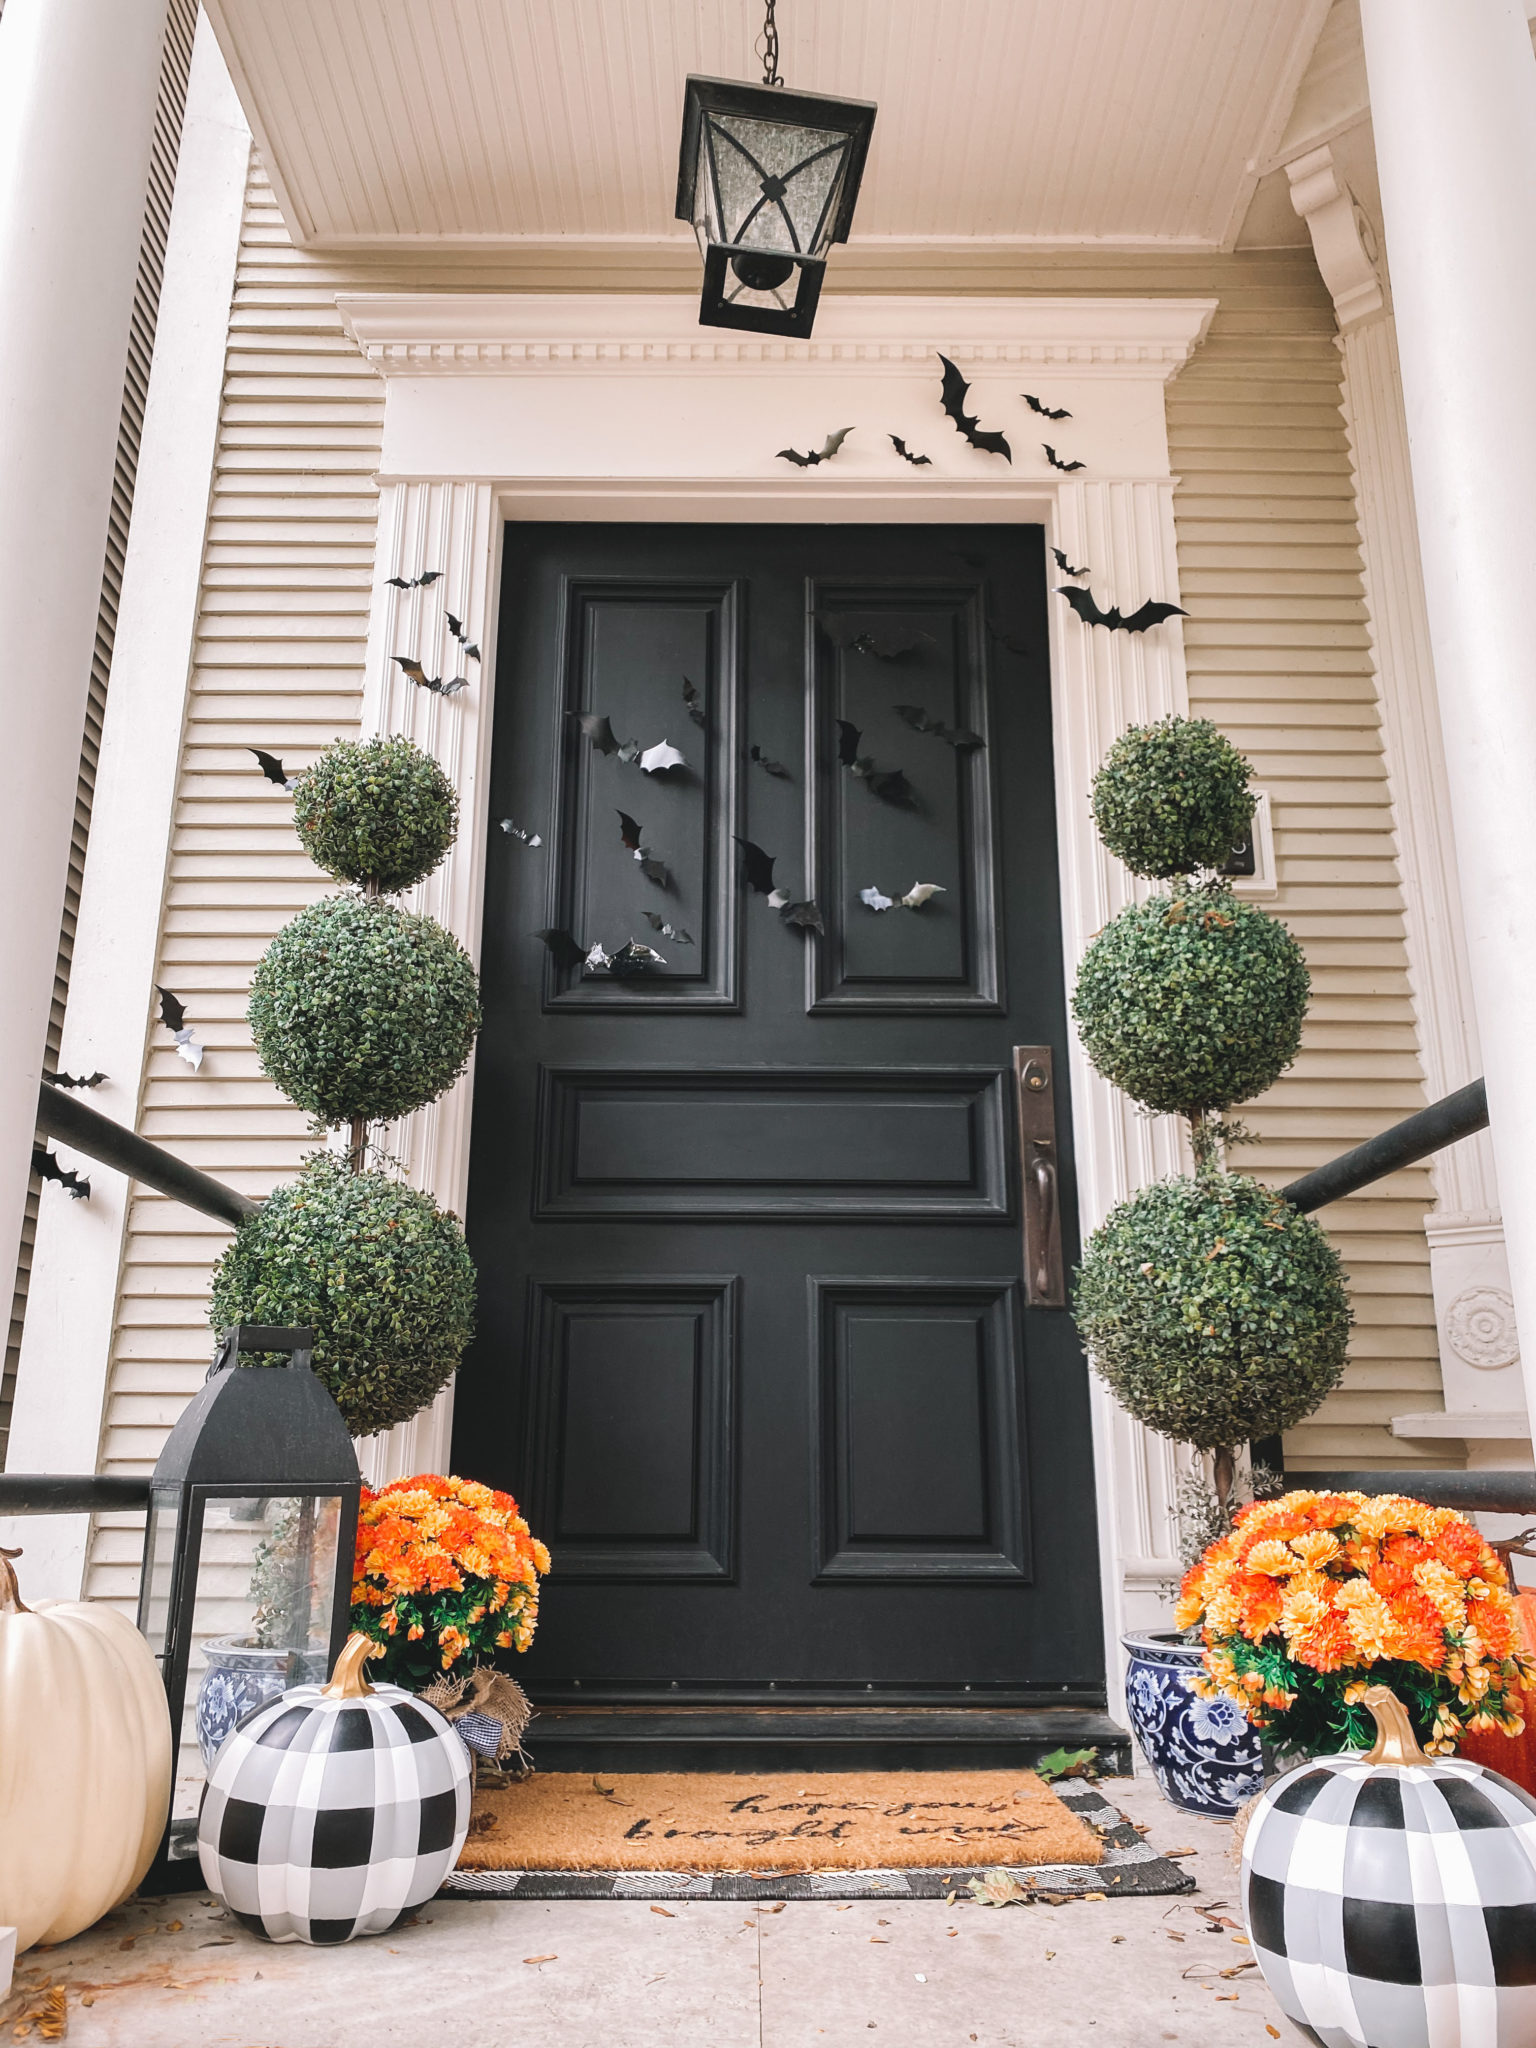 Our Halloween Decor | Kelly in the City | Lifestyle Blog